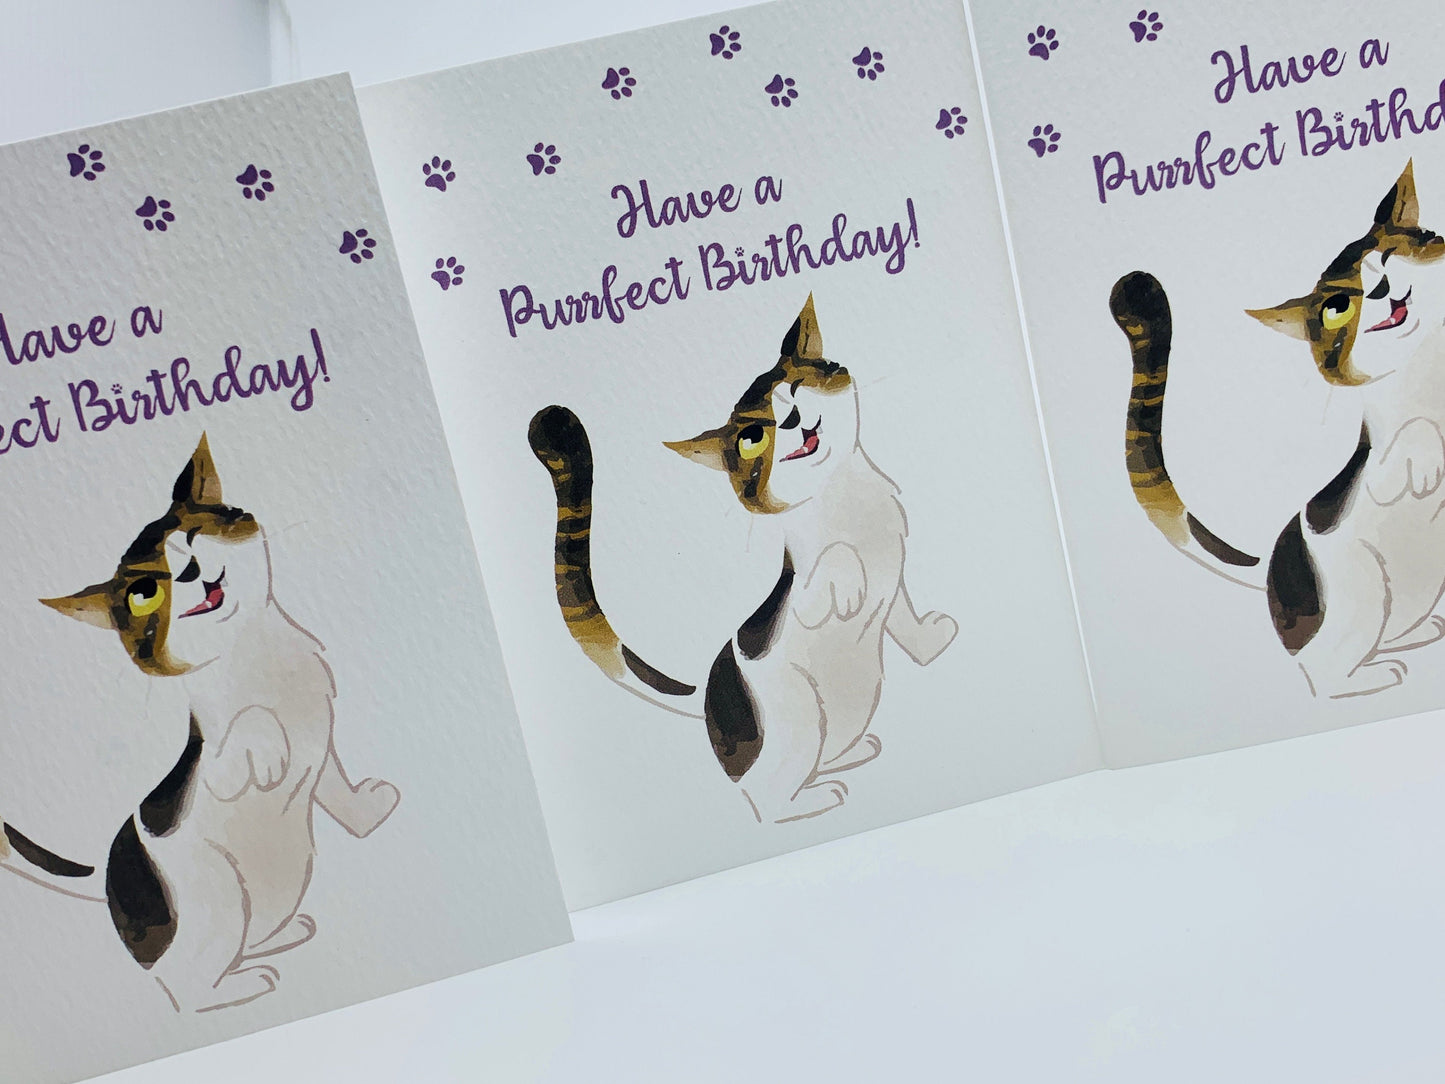 Cute Cat A6 Birthday Card with White Peel and Stick Envelope - FERGUS